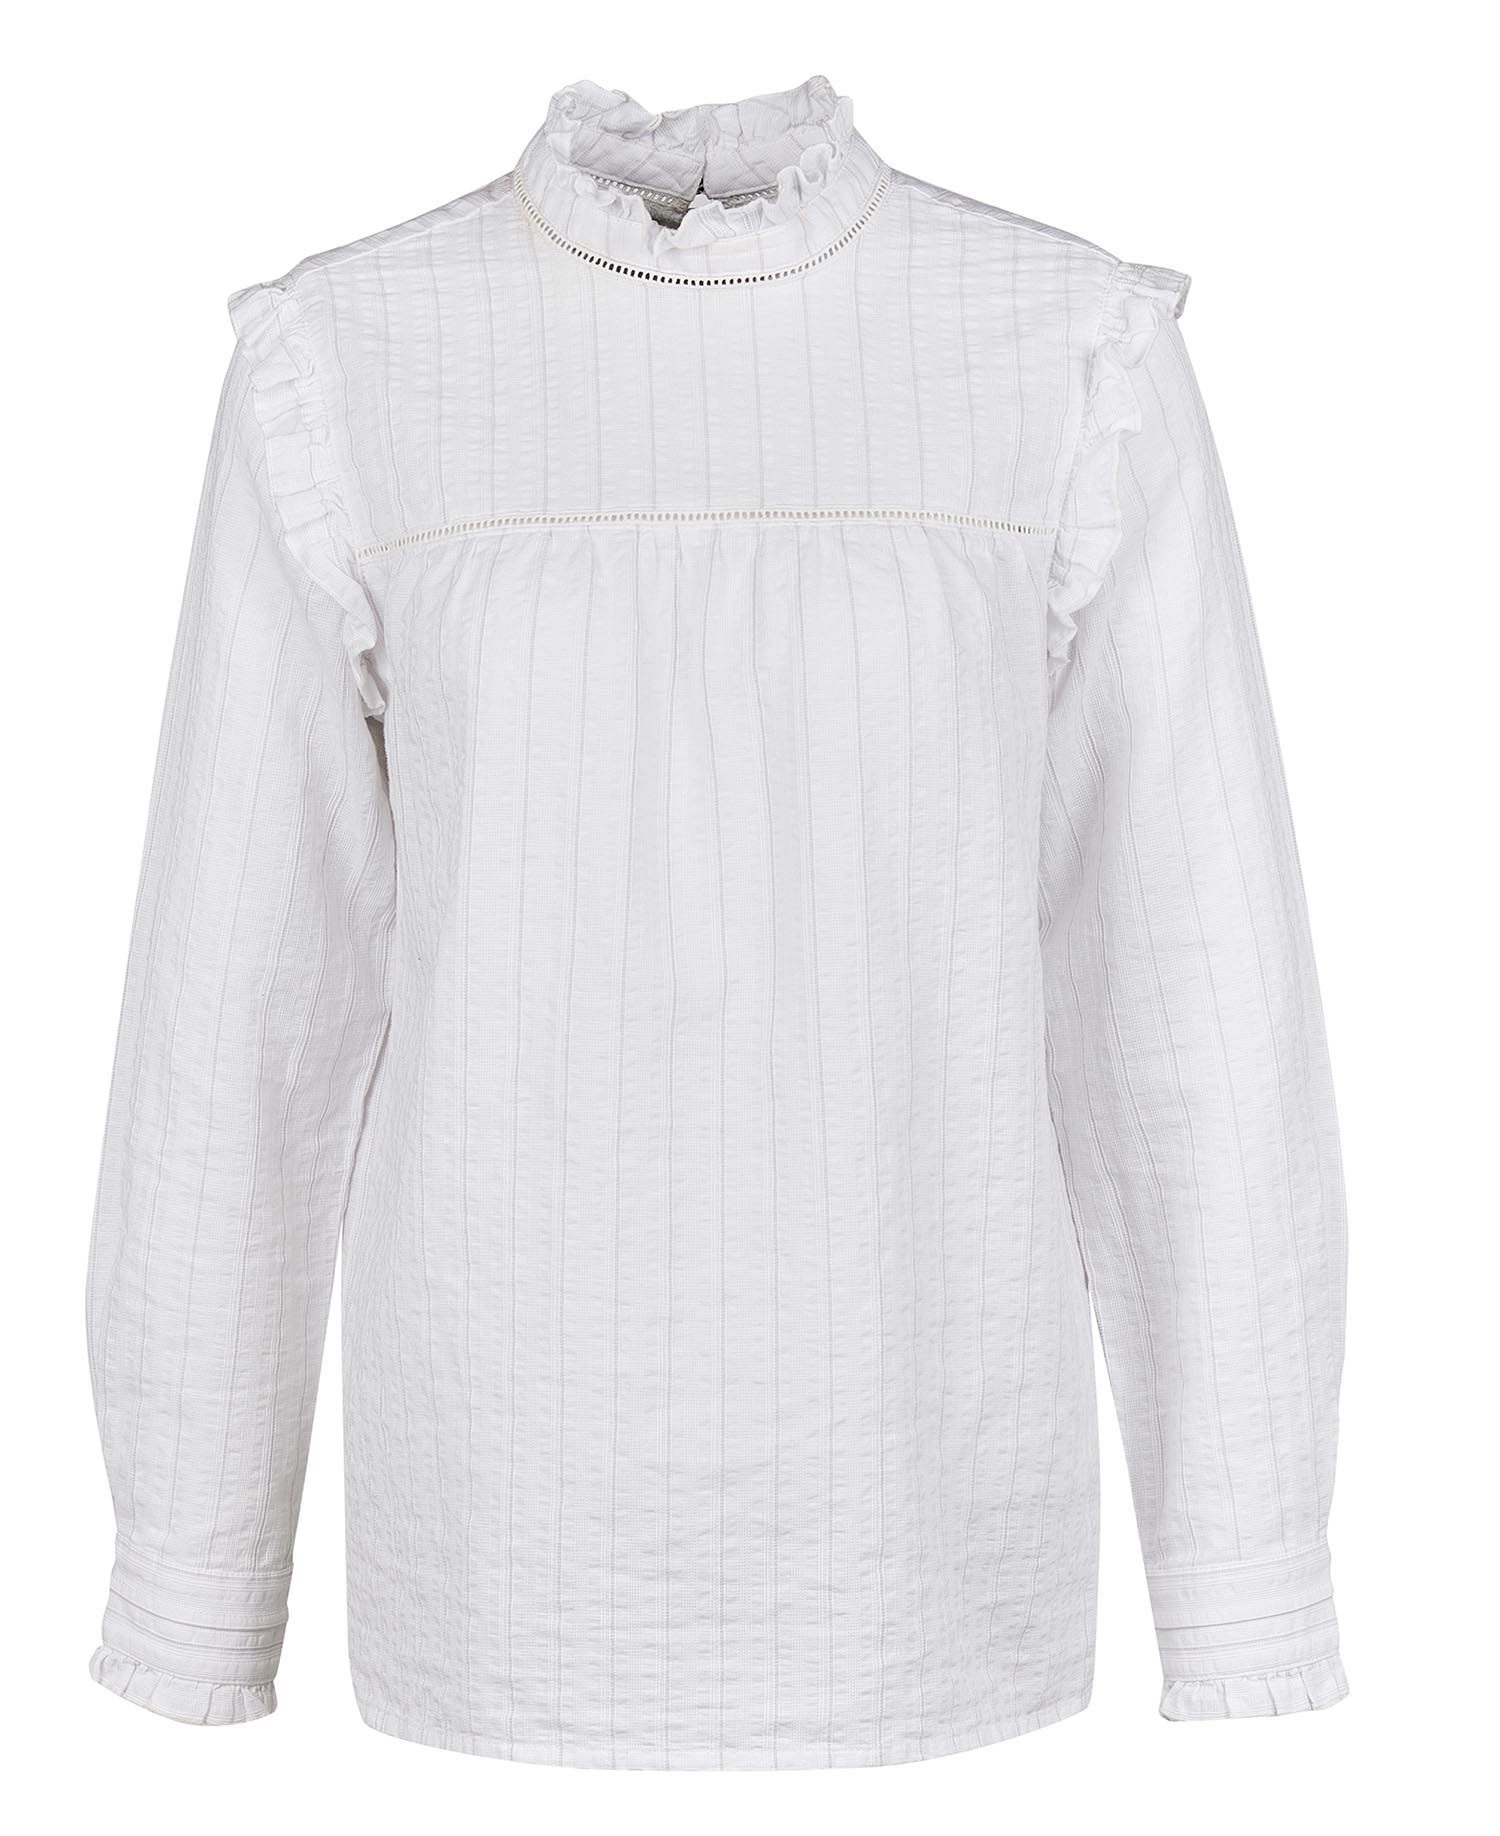 Barbour Haisley Top White